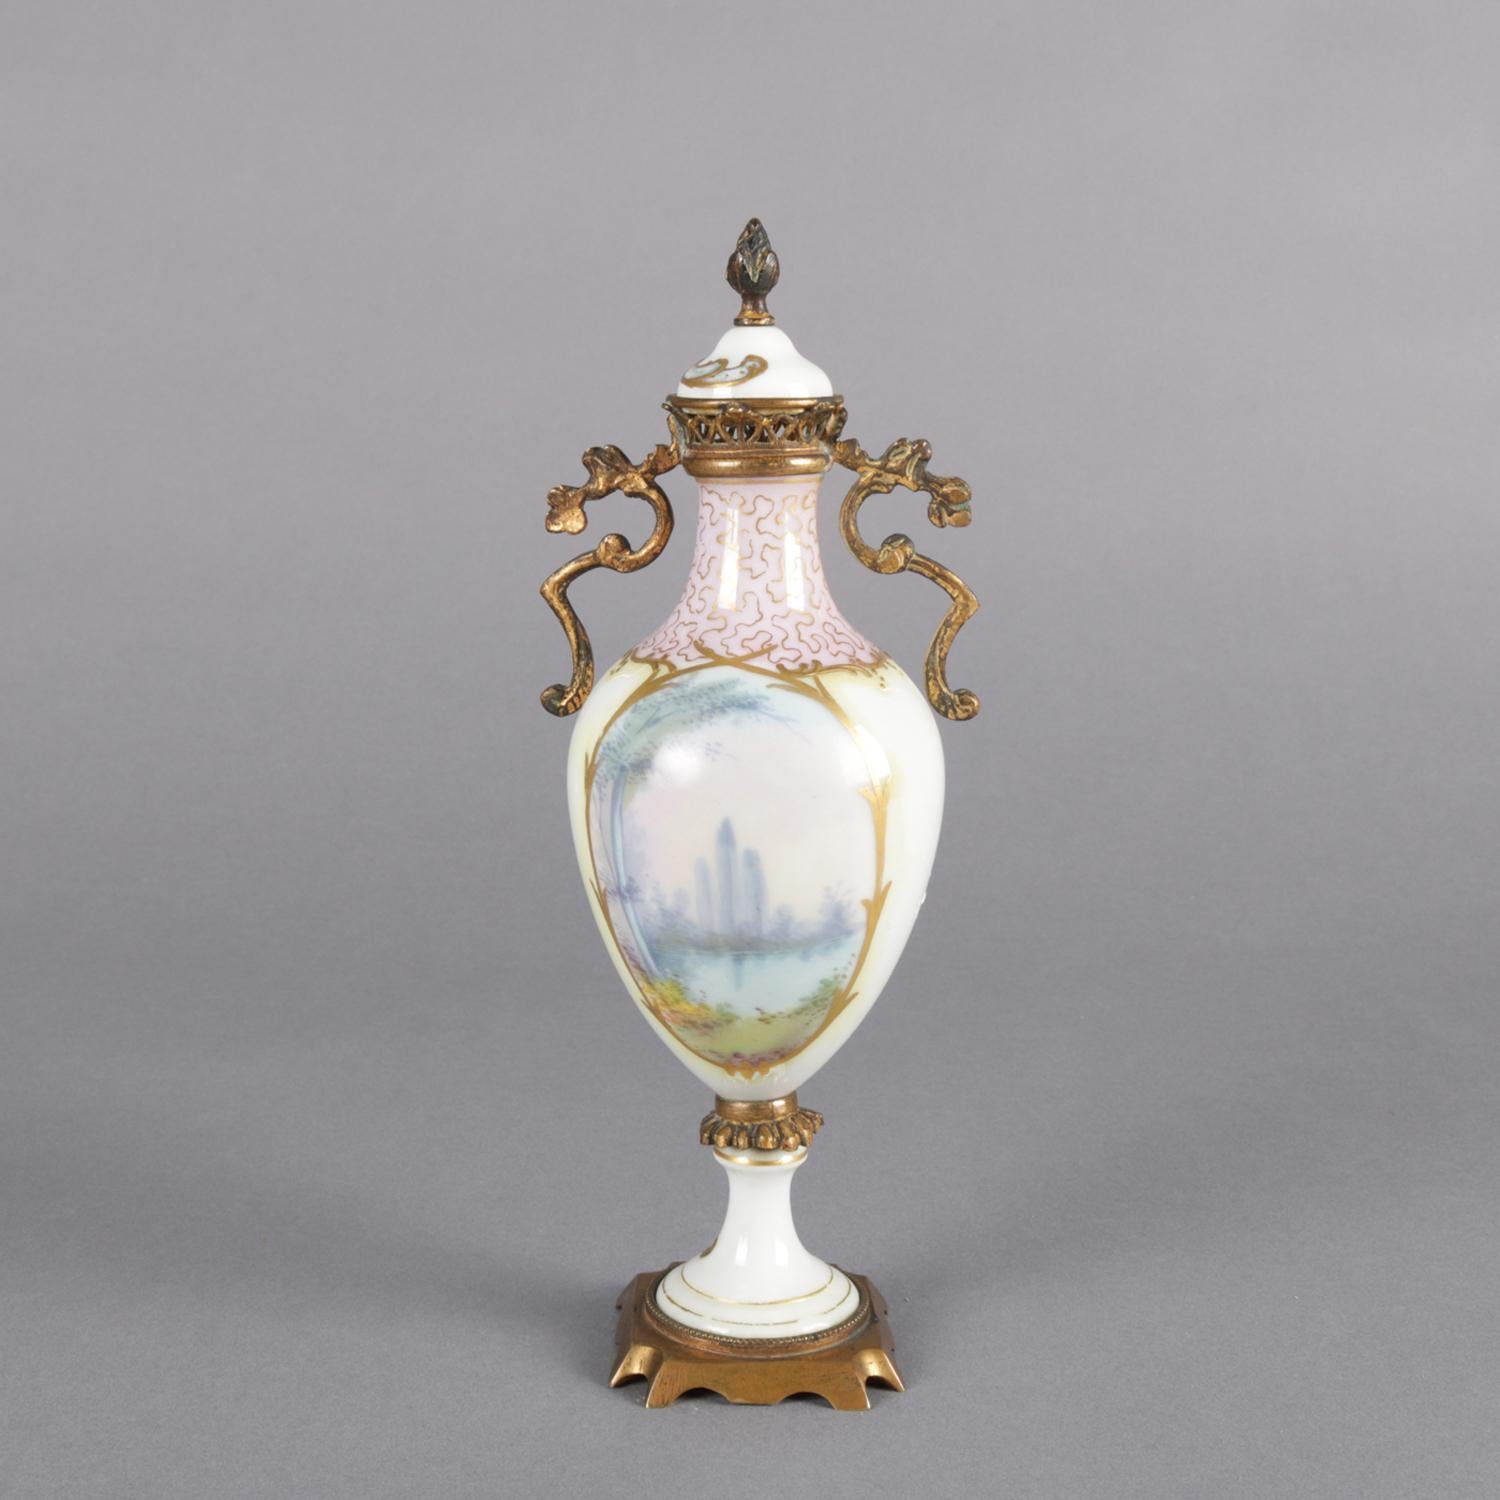 Cast Antique French Sèvres School Hand-Painted and Gilt Porcelain and Bronze Urn